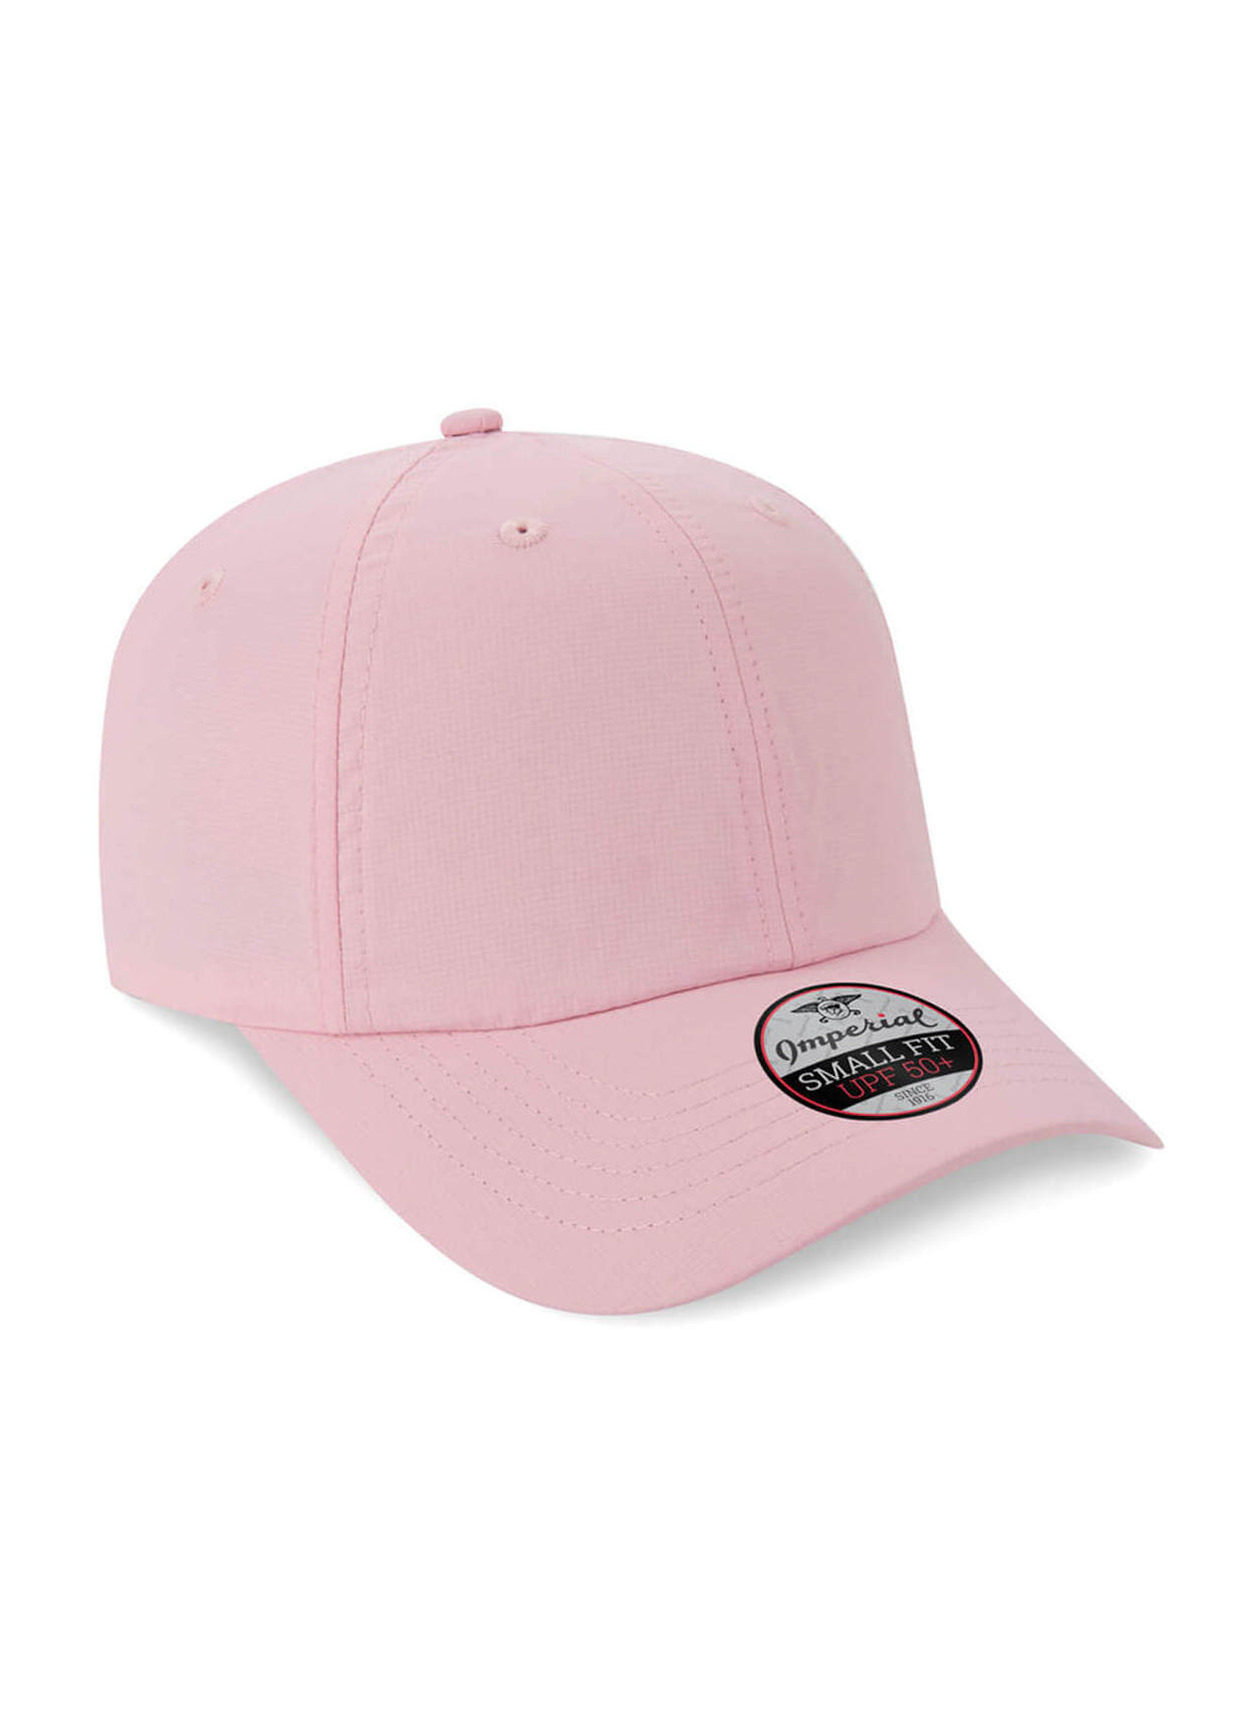 Imperial Light Pink Original Small Fit Performance Hat